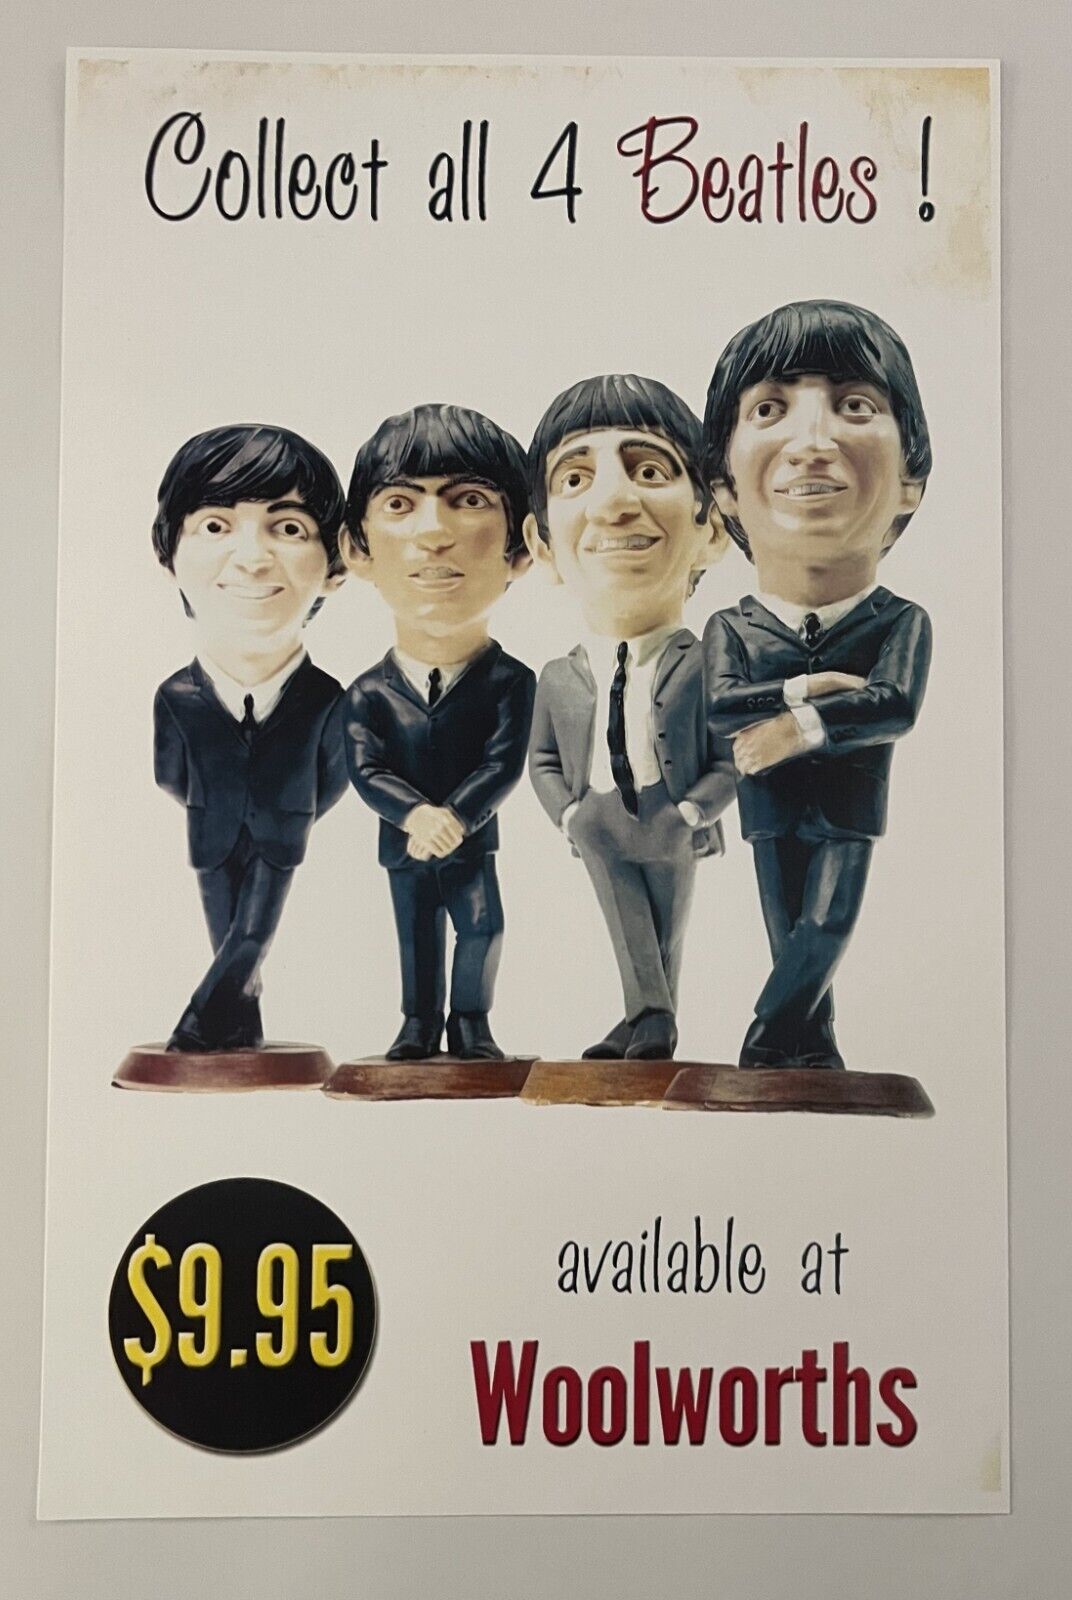 ESCO THE BEATLES 11 X 17 FRAMED ADVERTISING REPRODUCTION POSTER FROM WOOLWORTH